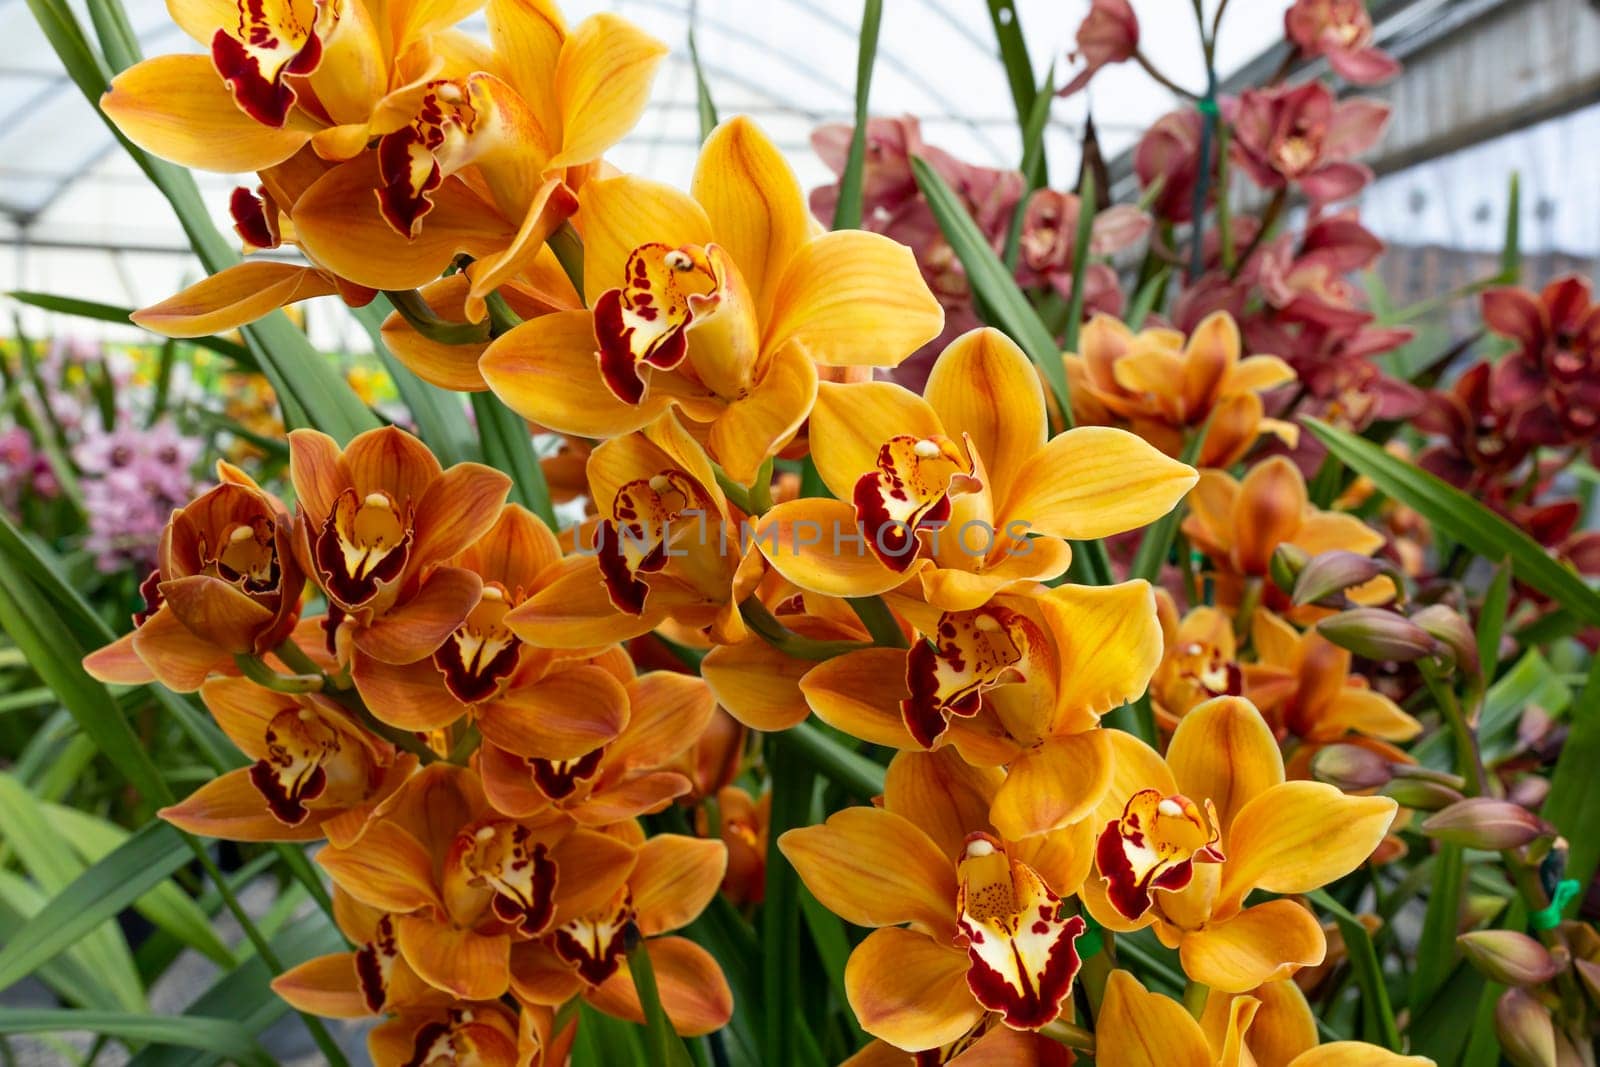 Yellow Red Cymbidiums Orchid Plant Flower in Greenhouse, family Orchidaceae. Blooming Cosmopolitan Flower with Green Leaves. Flora, Floriculture. Horizontal Plane. High quality photo